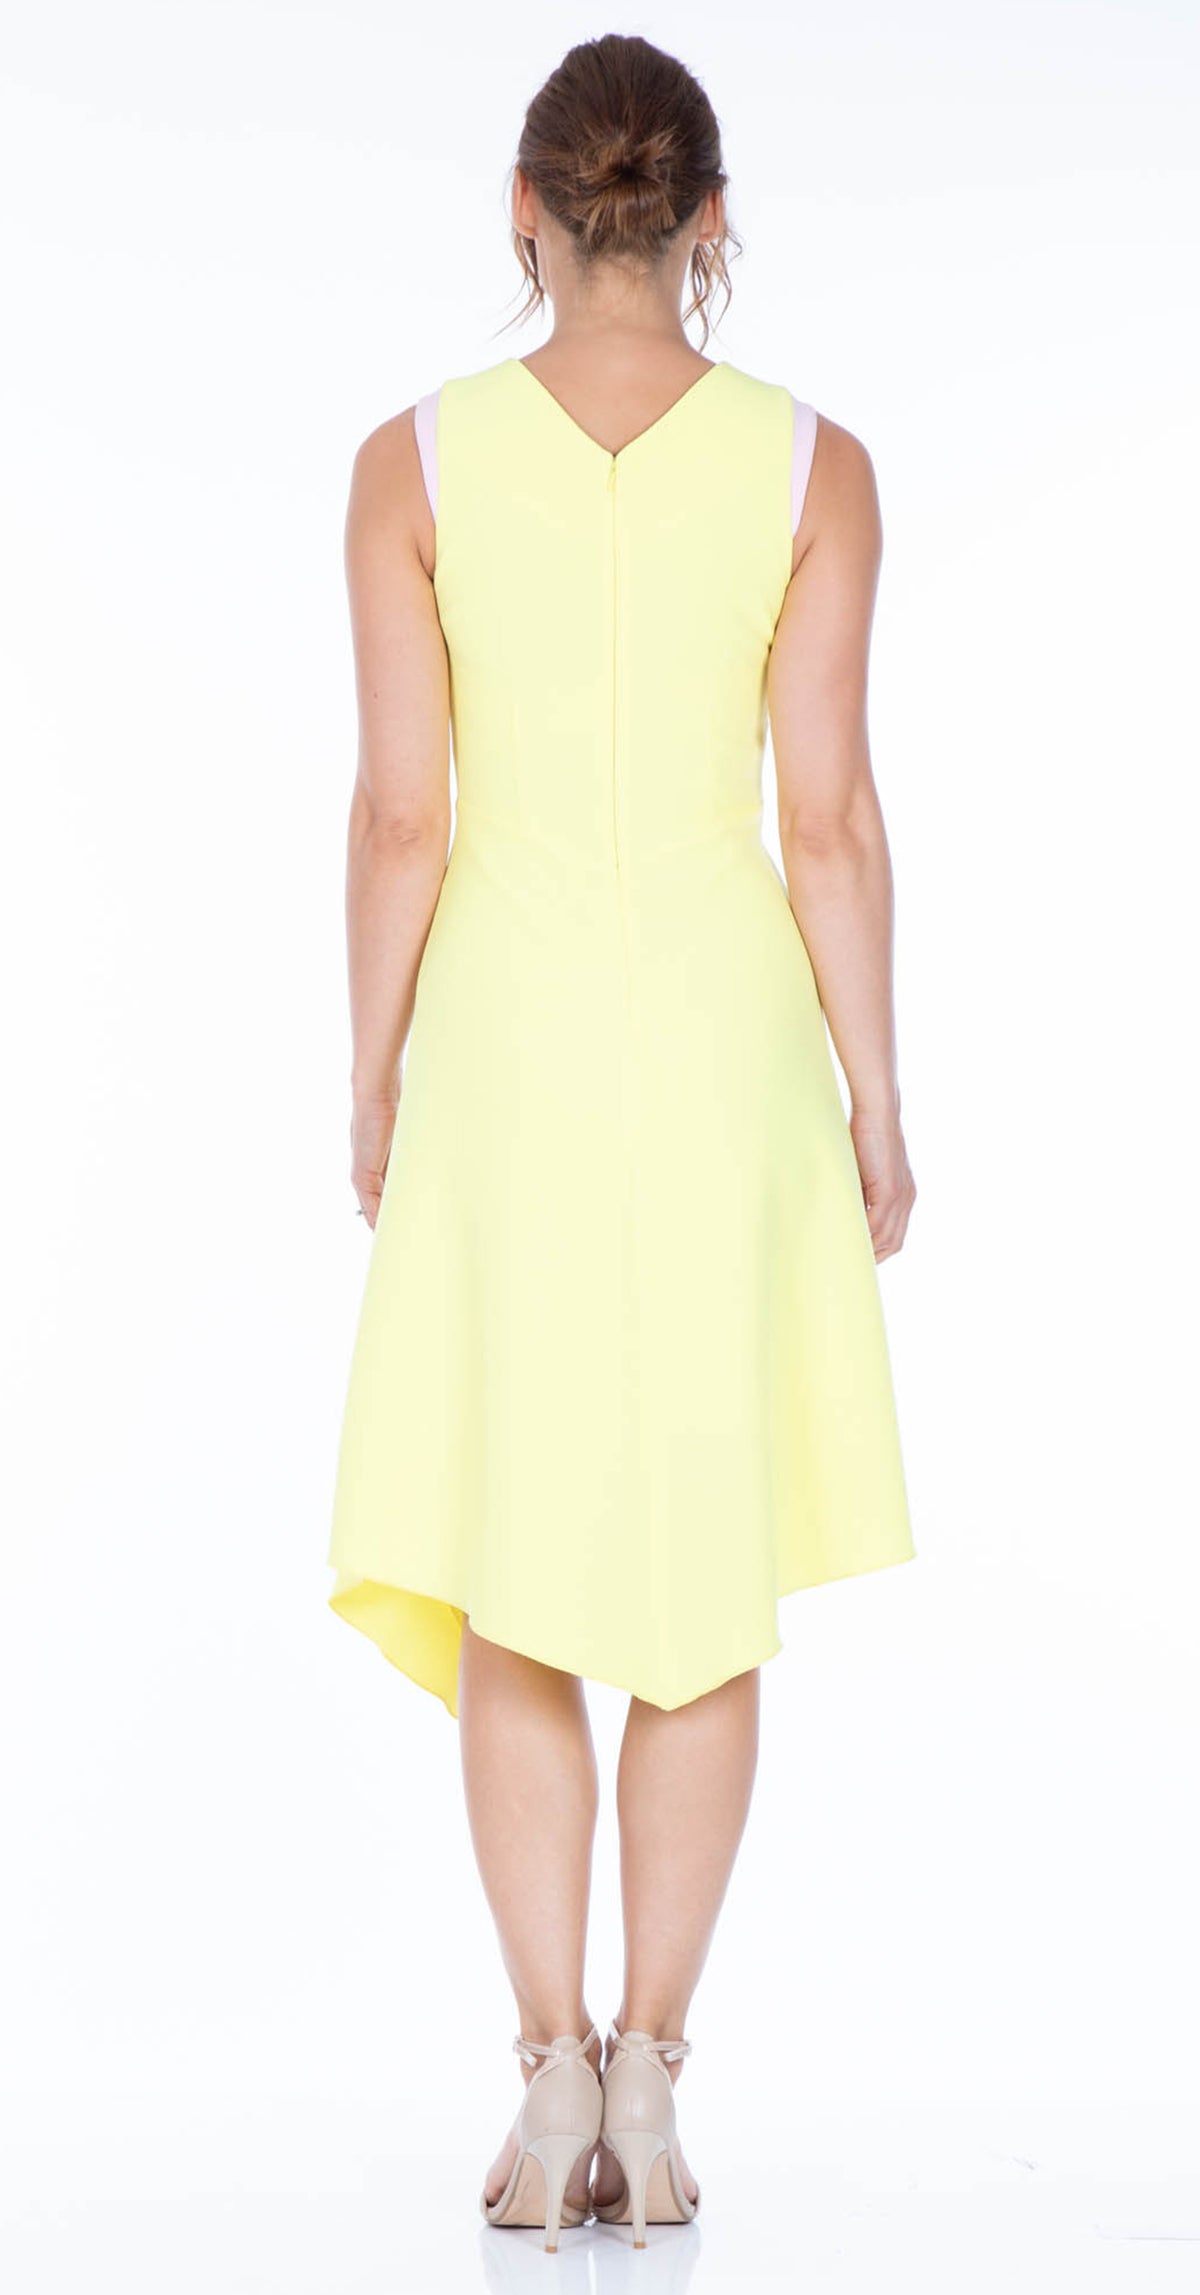 Adelle Dress DRC236 Yellow crepe with pink contrast